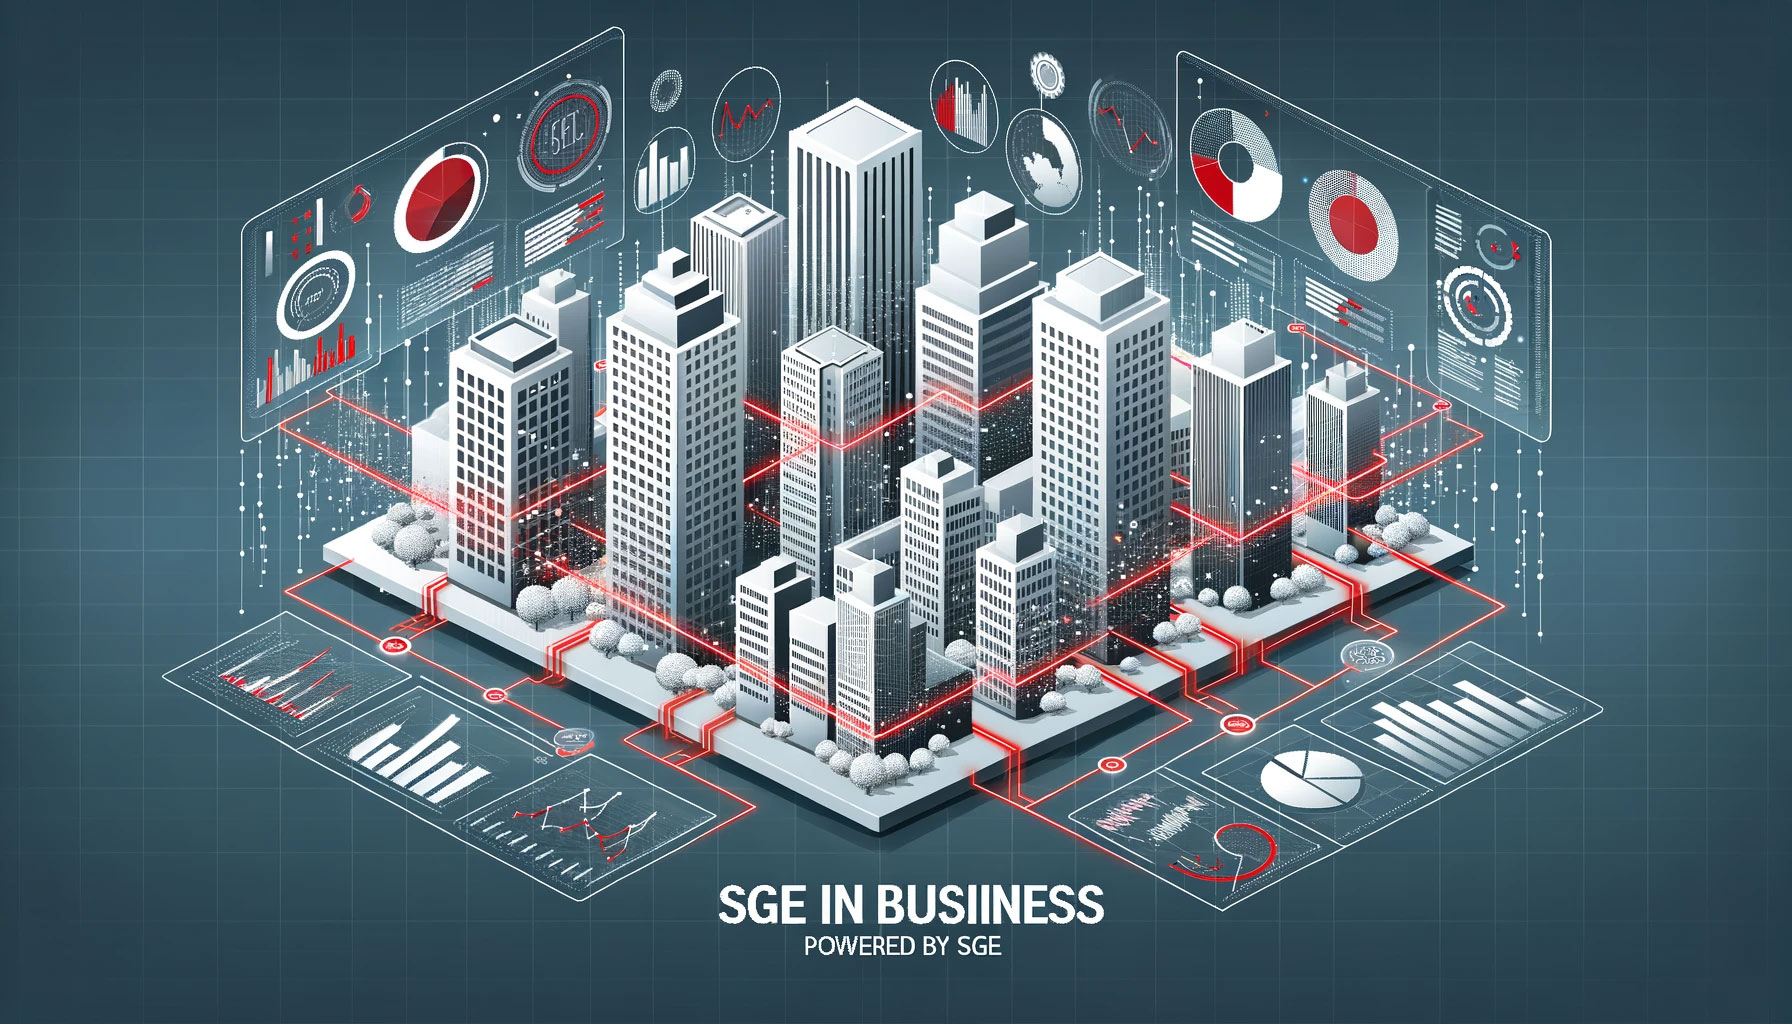 How SGE Can Be Used in Business